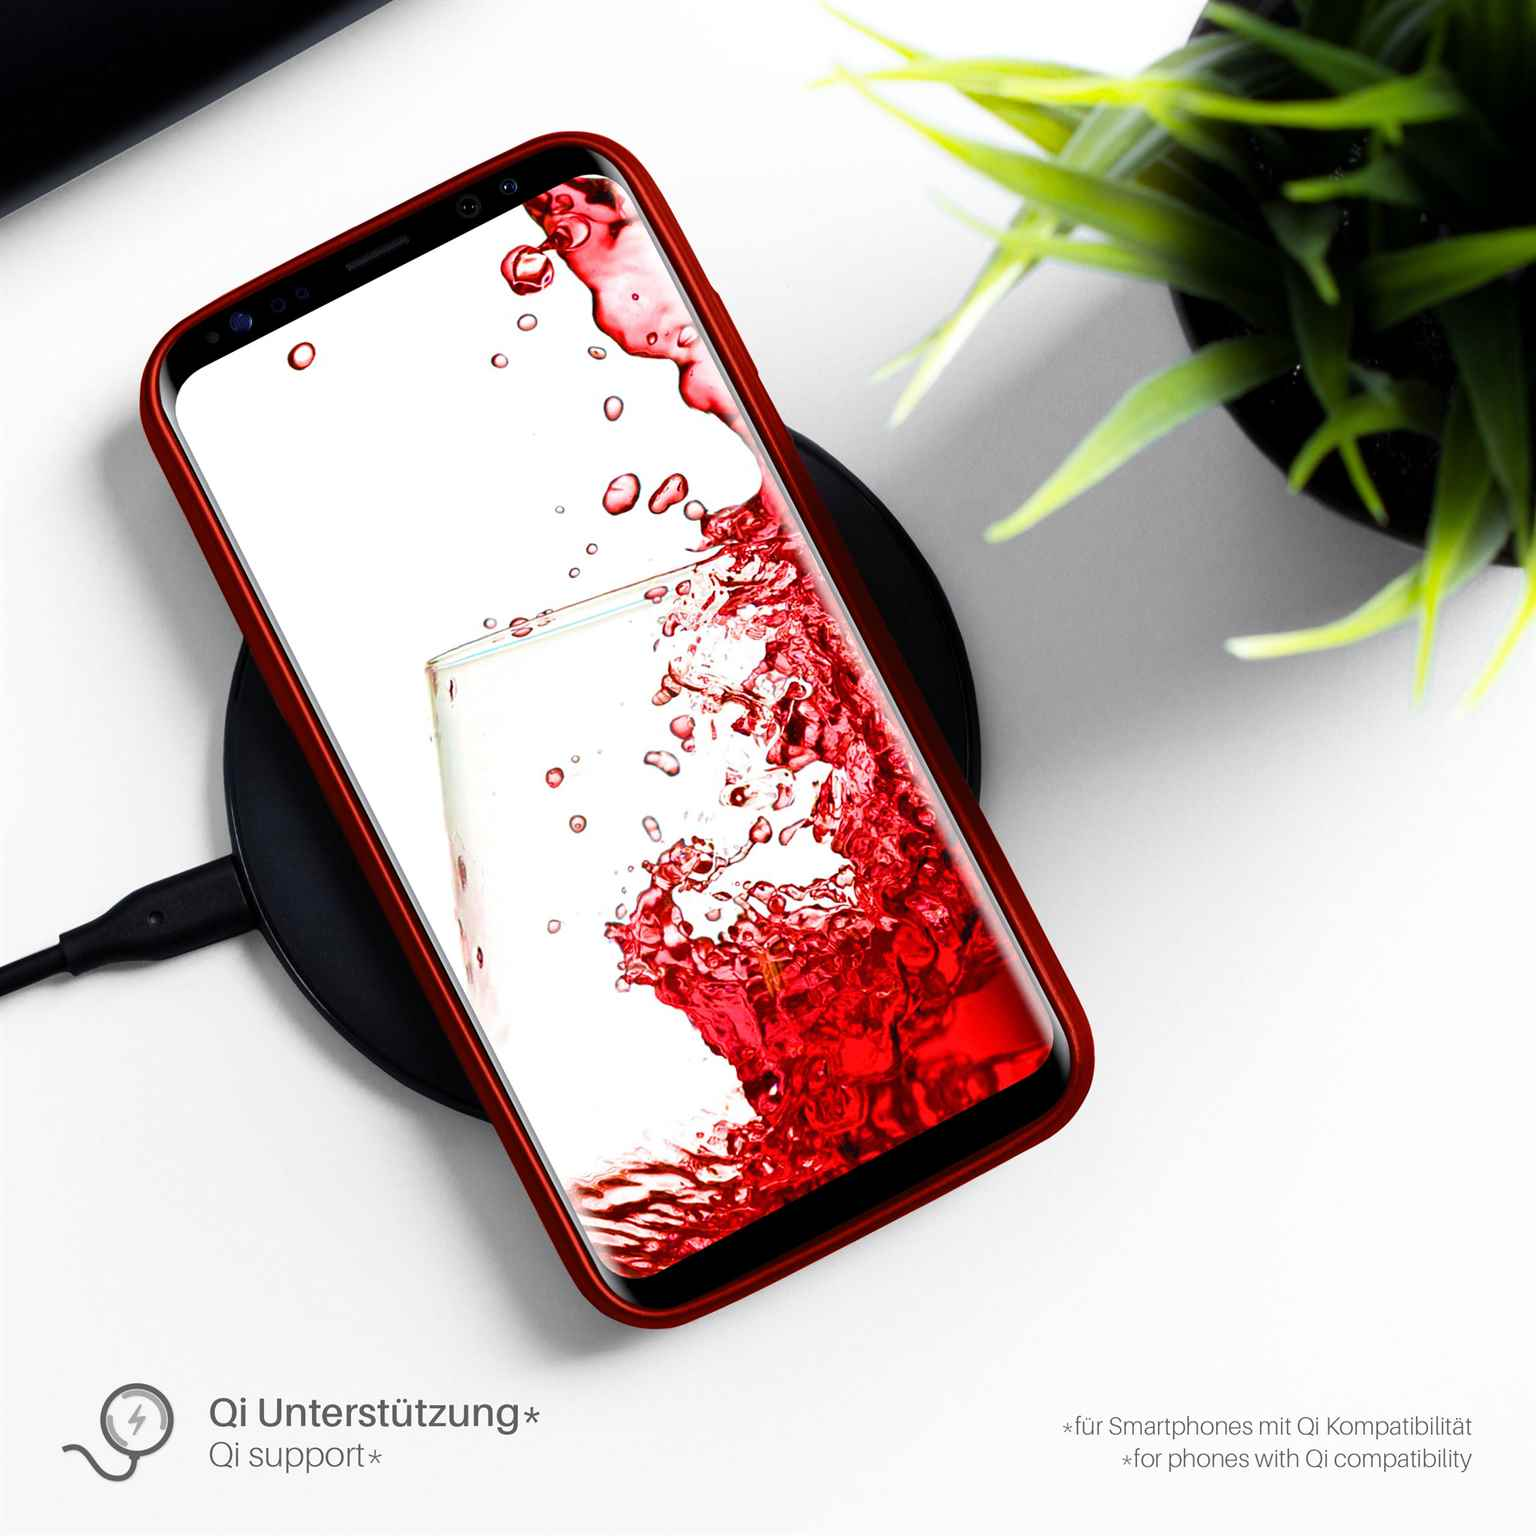 Samsung, Backcover, Case, MOEX Crimson-Red Brushed Galaxy S8,